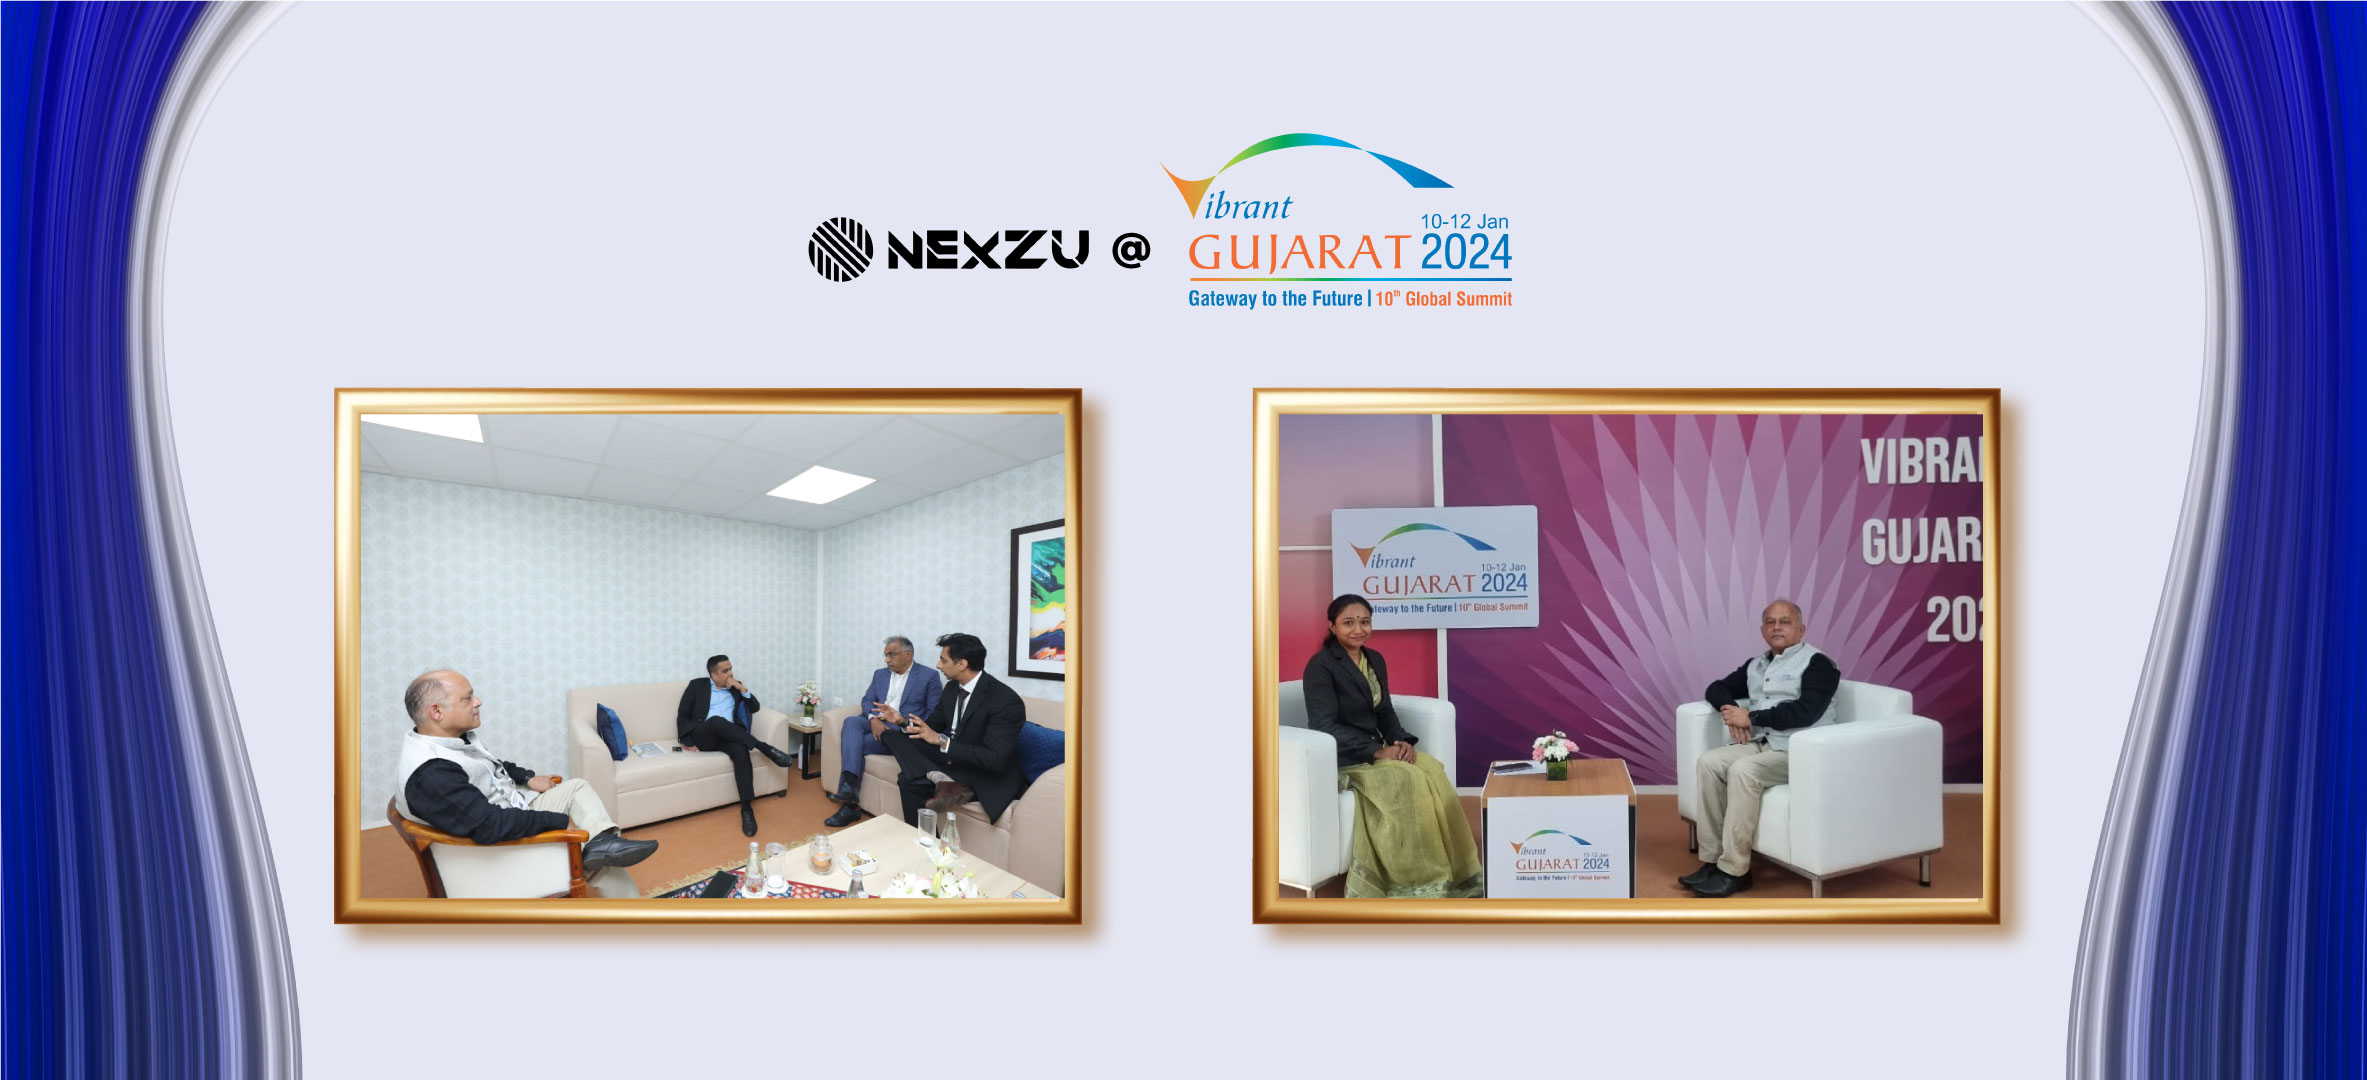 Nexzu Mobility’s Vision for Electric Mobility Takes Center Stage at Vibrant Gujarat Global Summit 2024